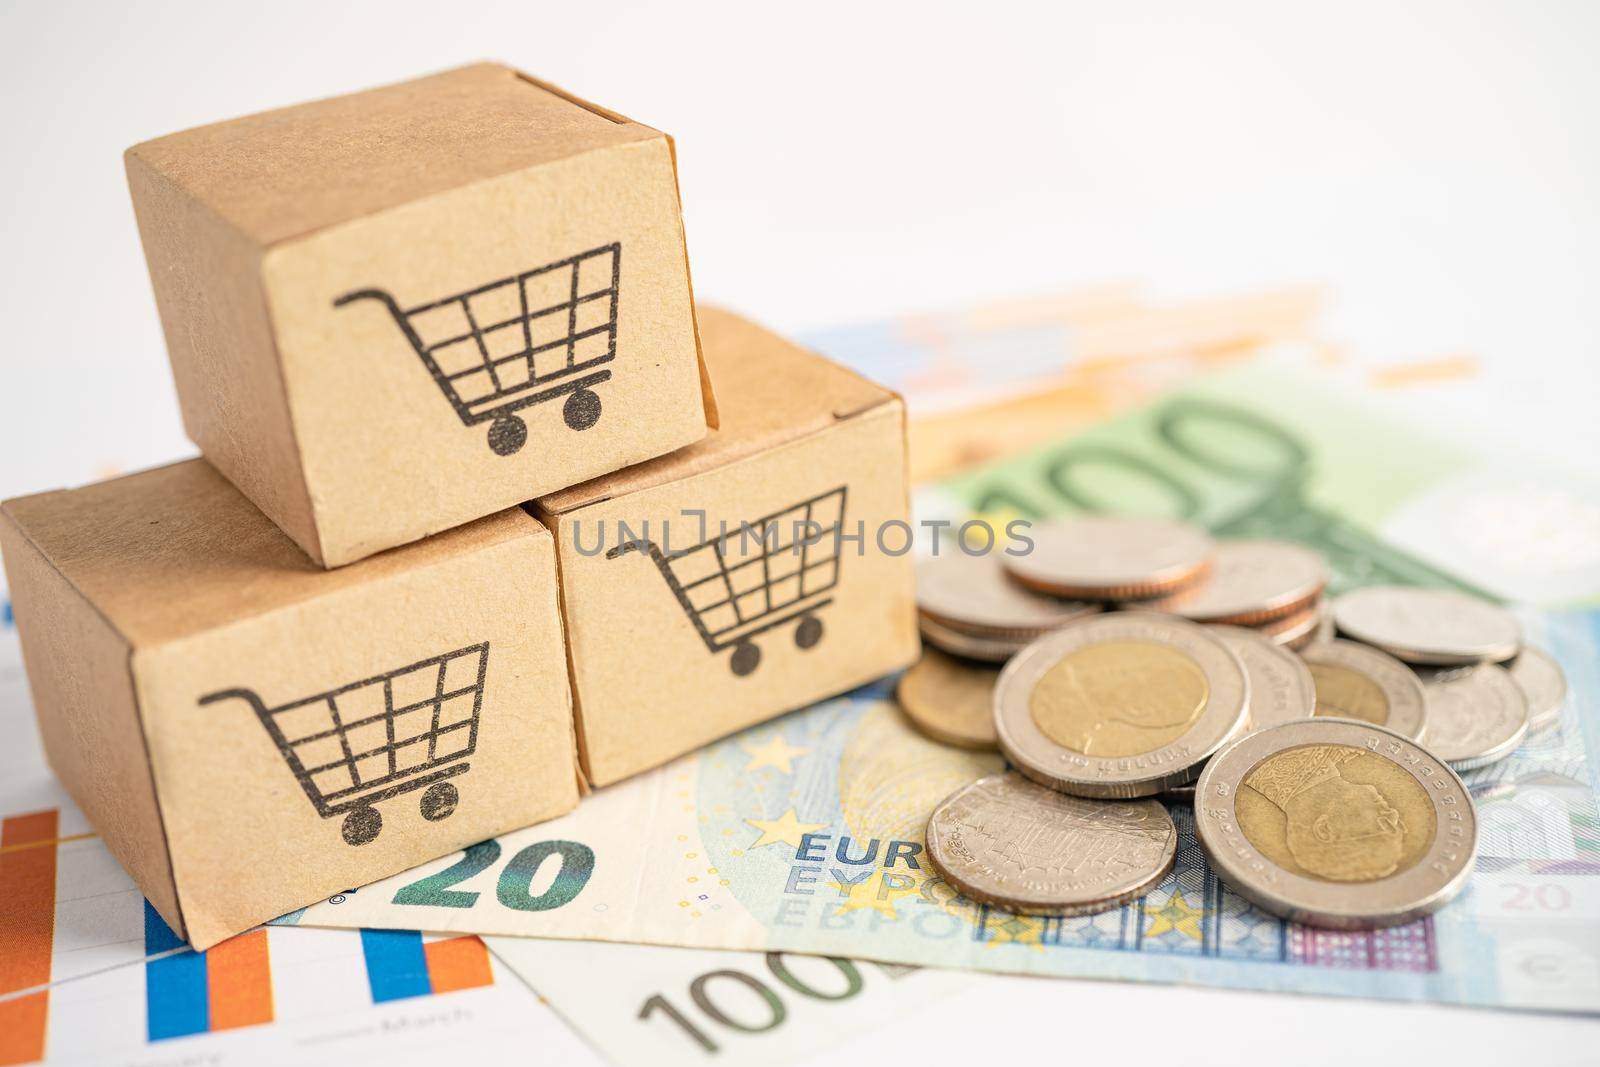 Shopping cart logo on box with US dollar banknotes, Banking Account, Investment Analytic research data economy, trading, Business import export online company concept.